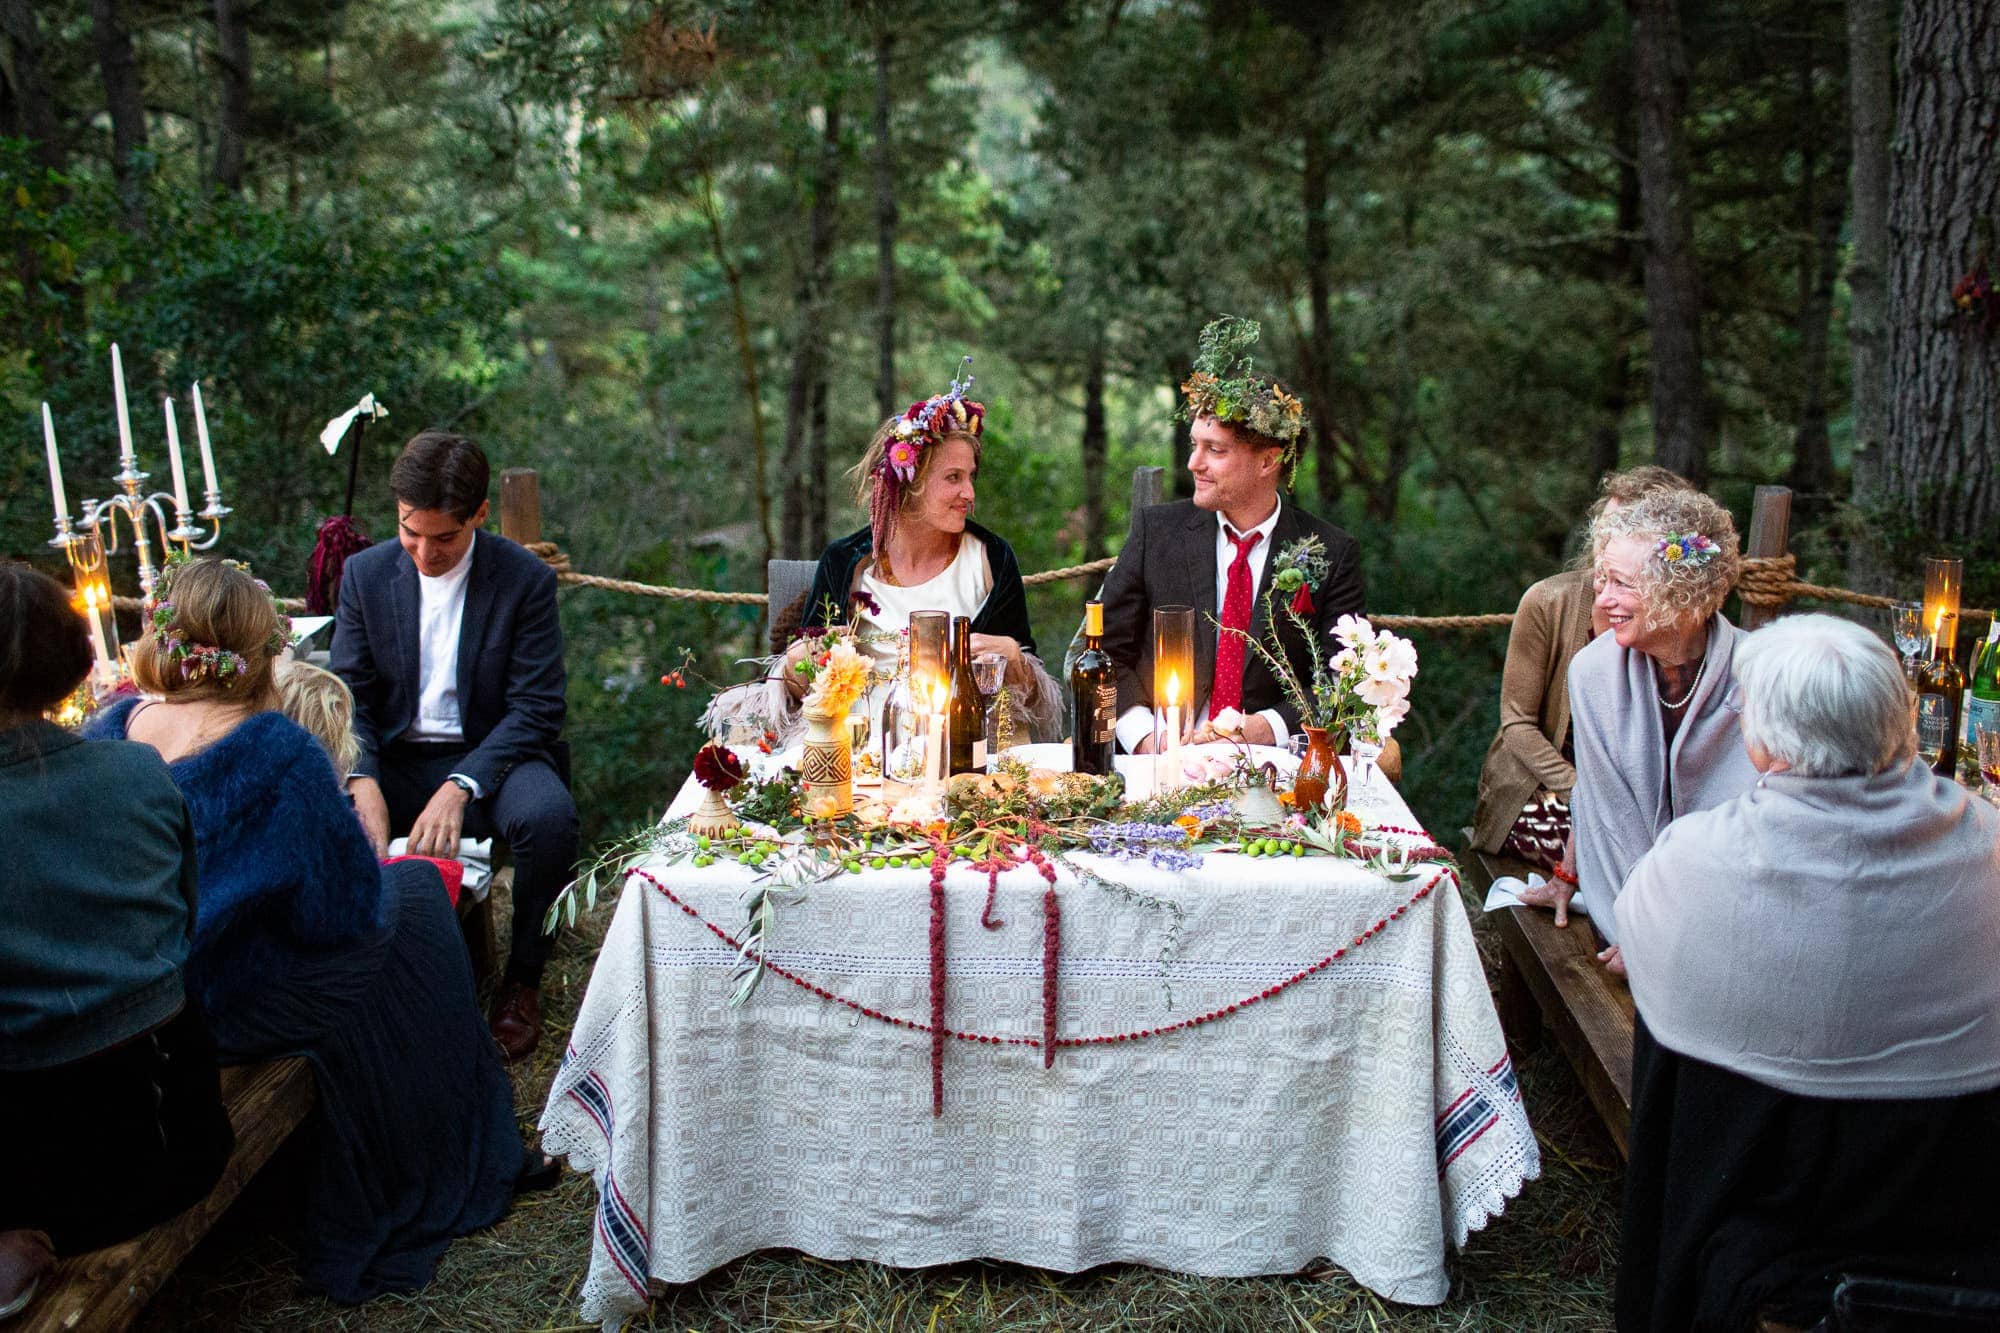 Bohemian Newlyweds at sweetheart table outside looking at each other during wedding reception